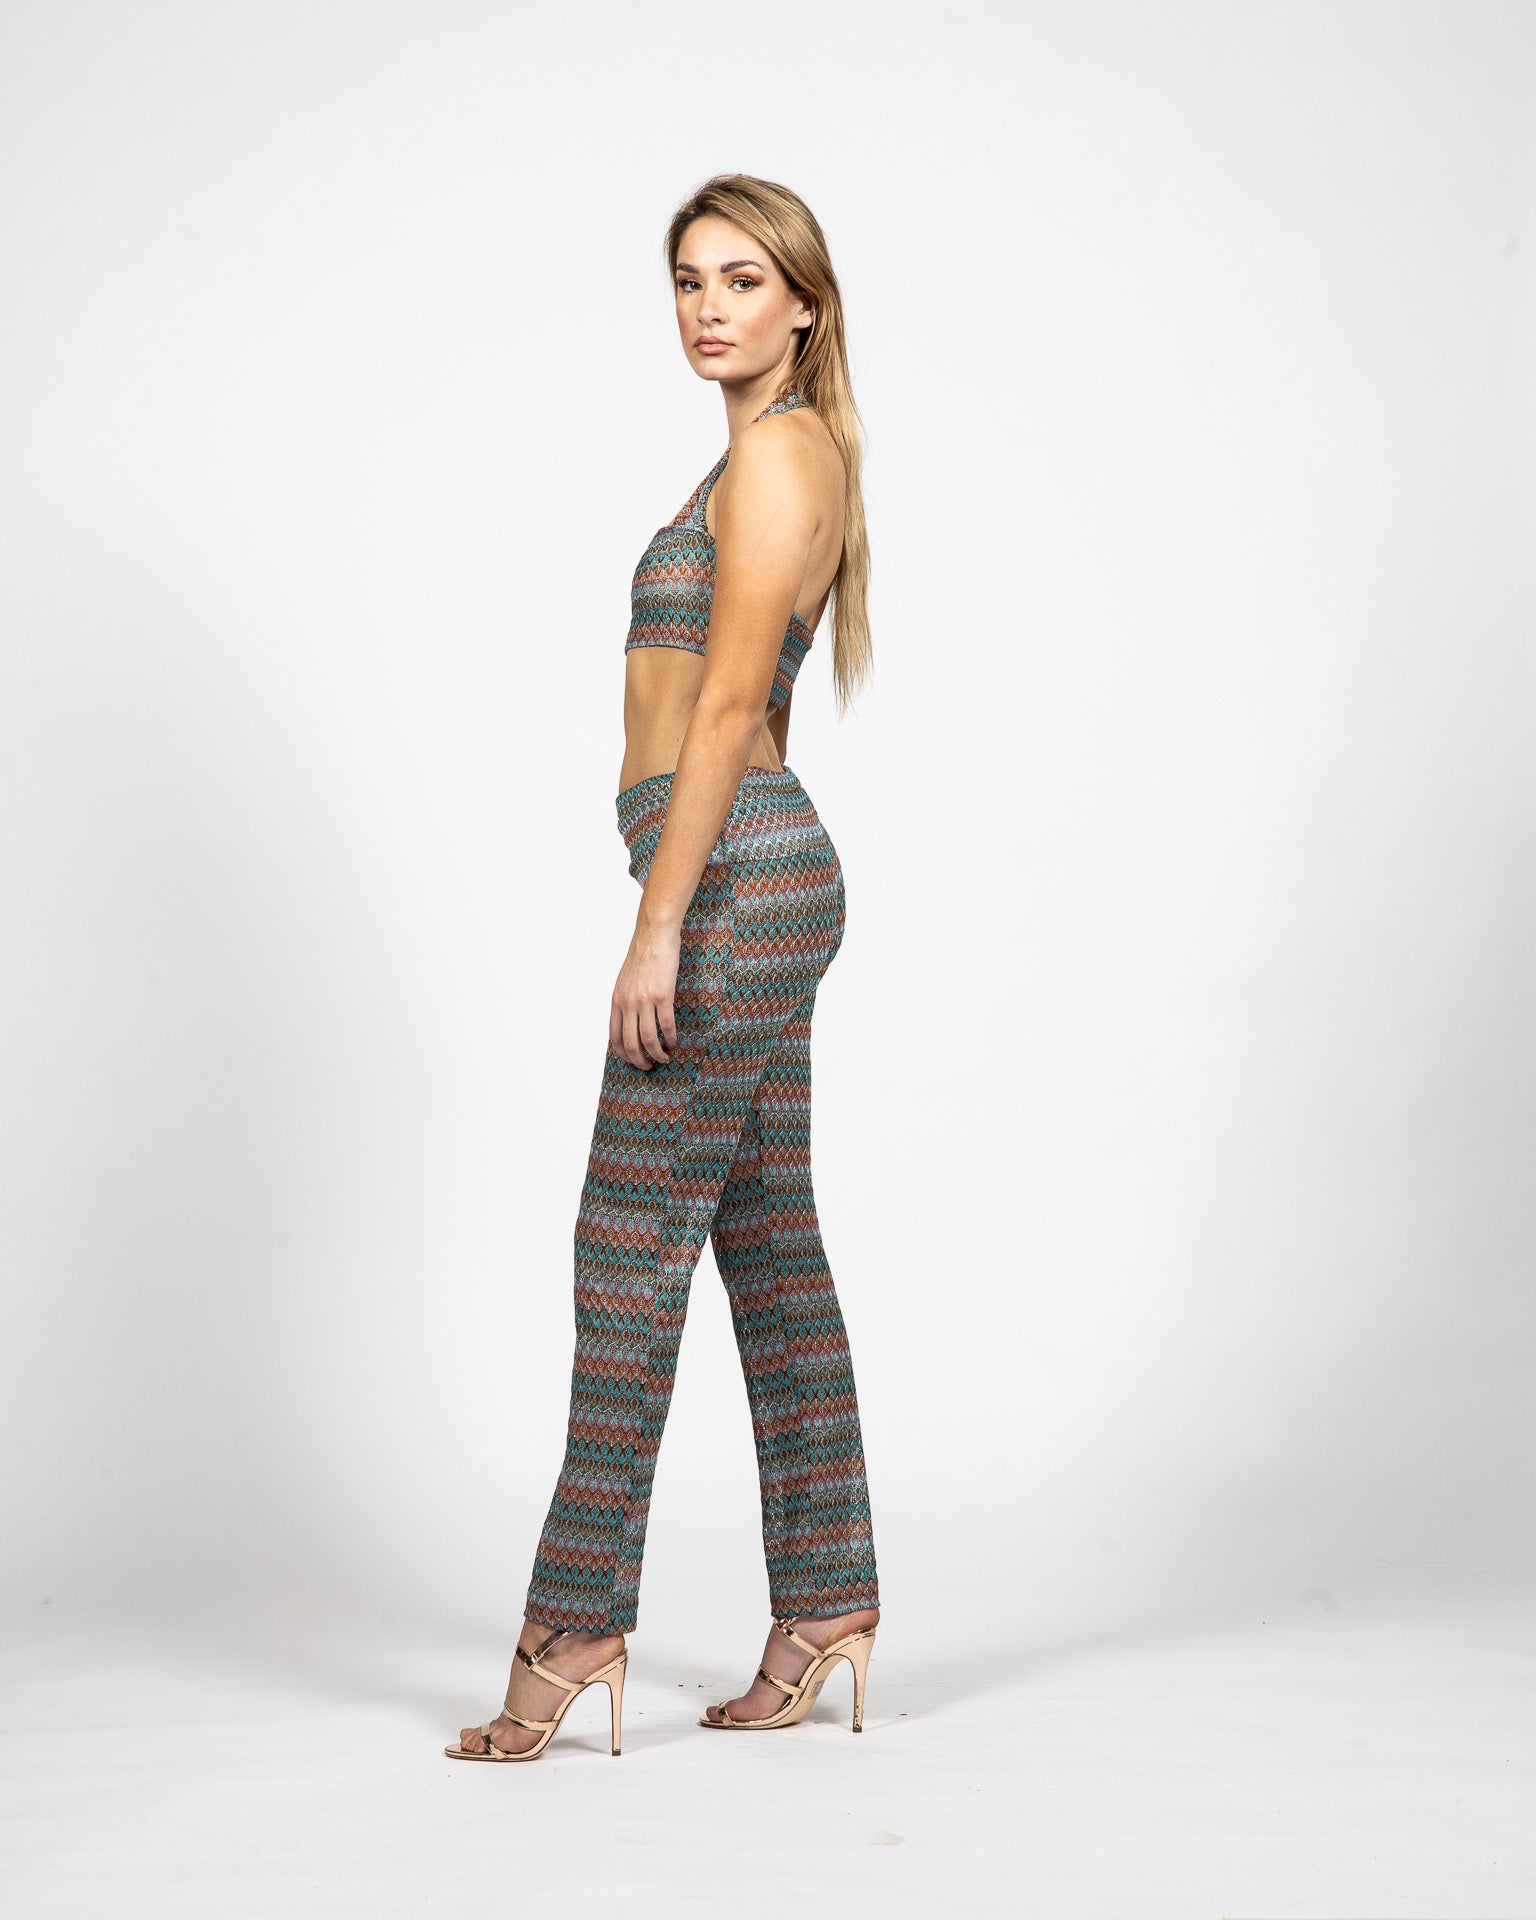 Cropped halter top, bolero shrug, cropped top with long sleeves with matching stretch pants - 3/4th View - Samuel Vartan